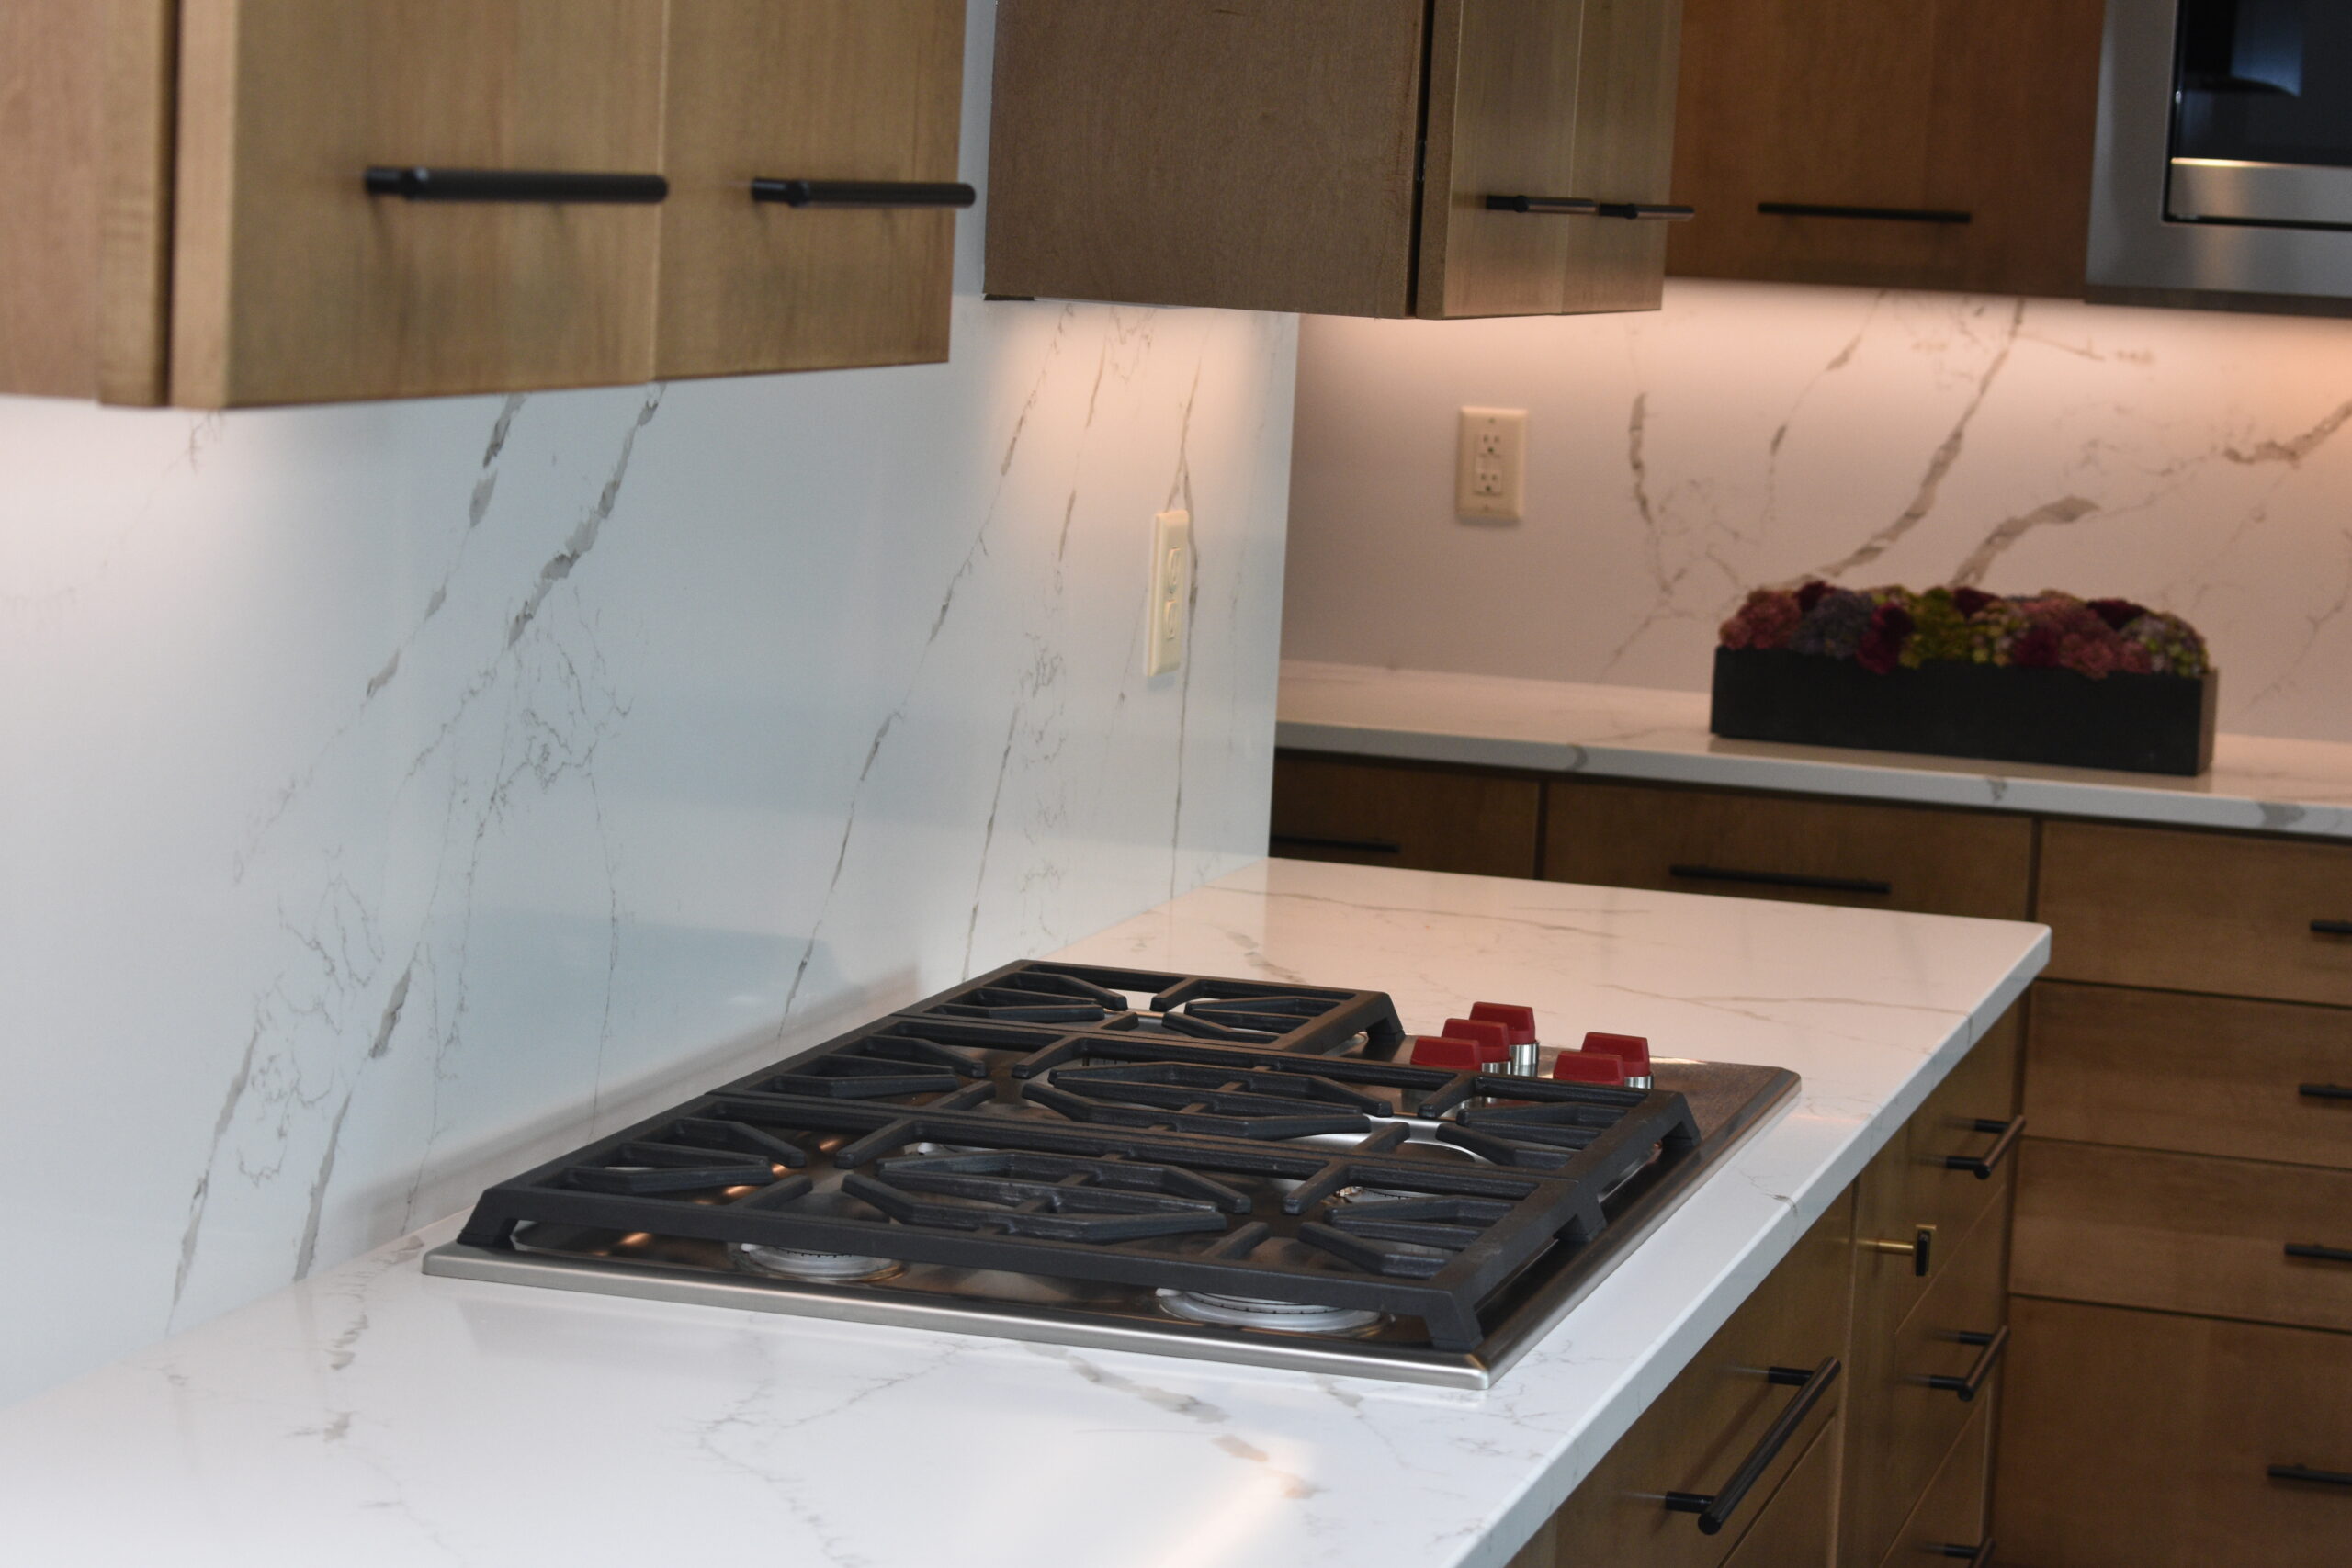 Contemporary Kitchen - Close up of range built into countertop